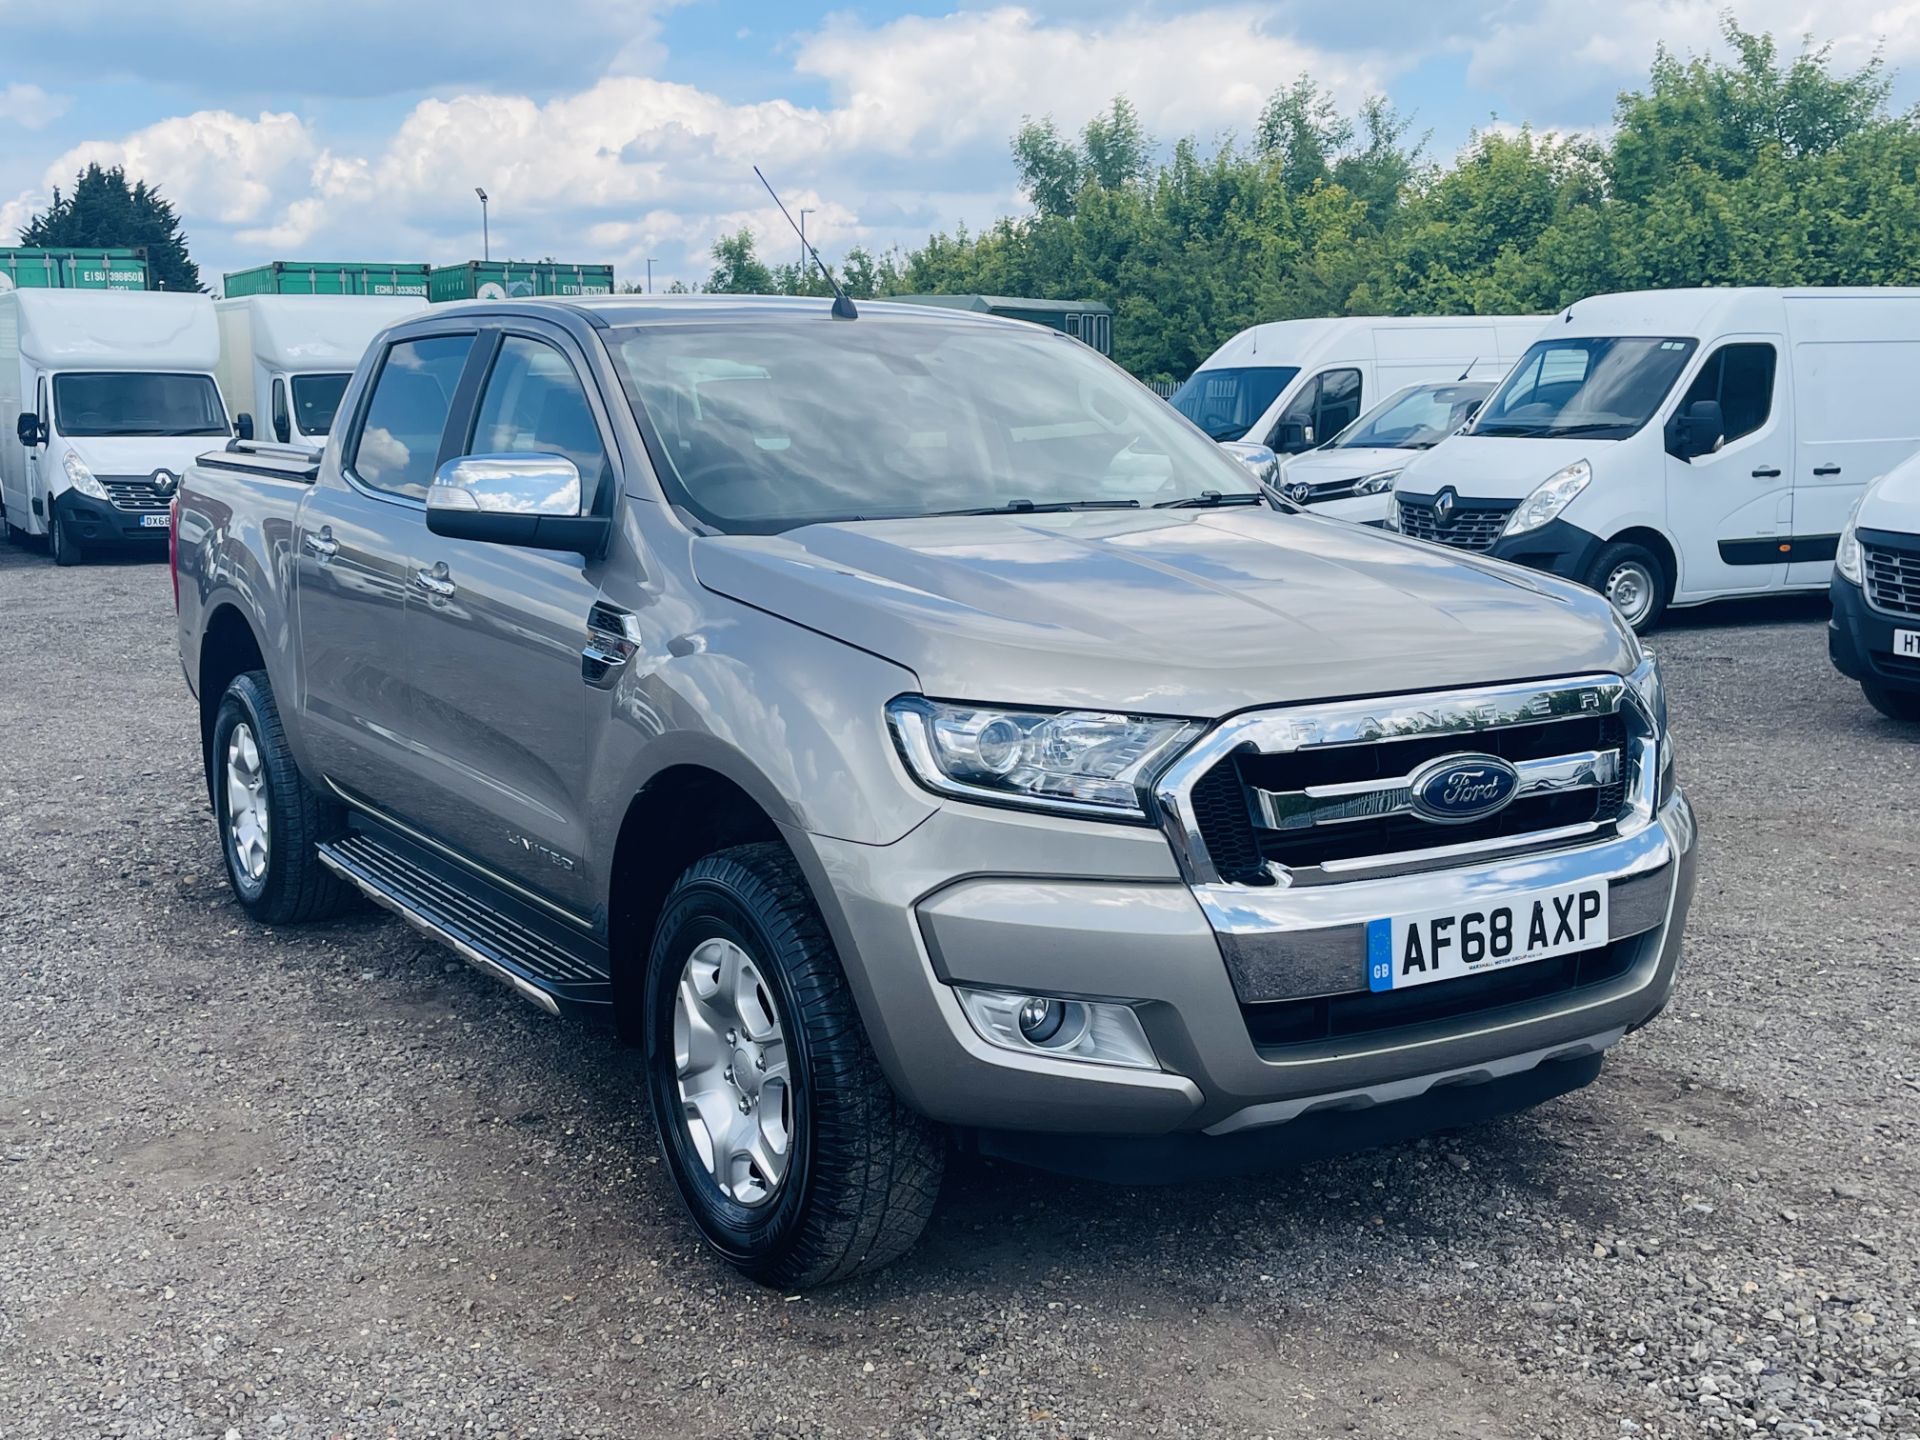 ** ON SALE ** Ford Ranger 3.2 TDCI Limited 2018 '68 Reg' Auto 4WD - Sat Nav - A/C - Euro 6 - Image 2 of 35